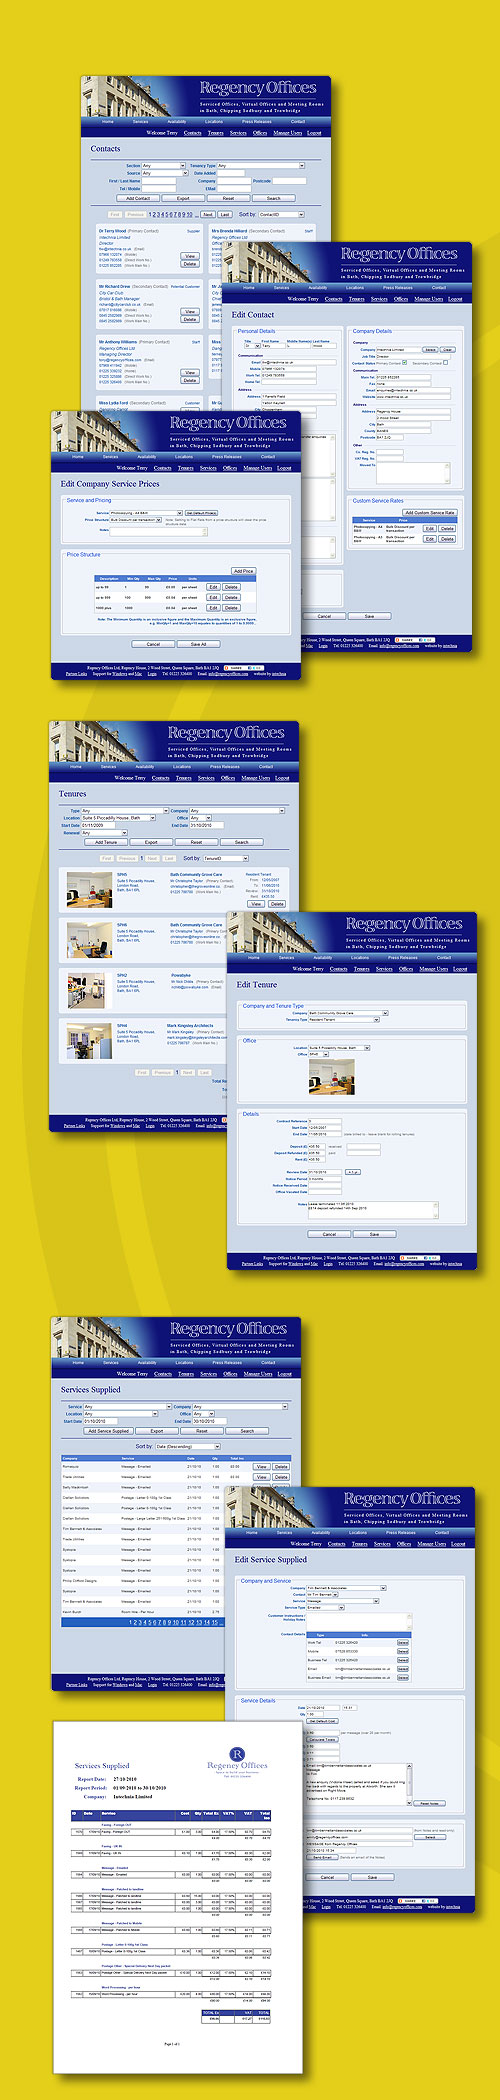 Regency Offices - Office Management System - designed by Intechnia